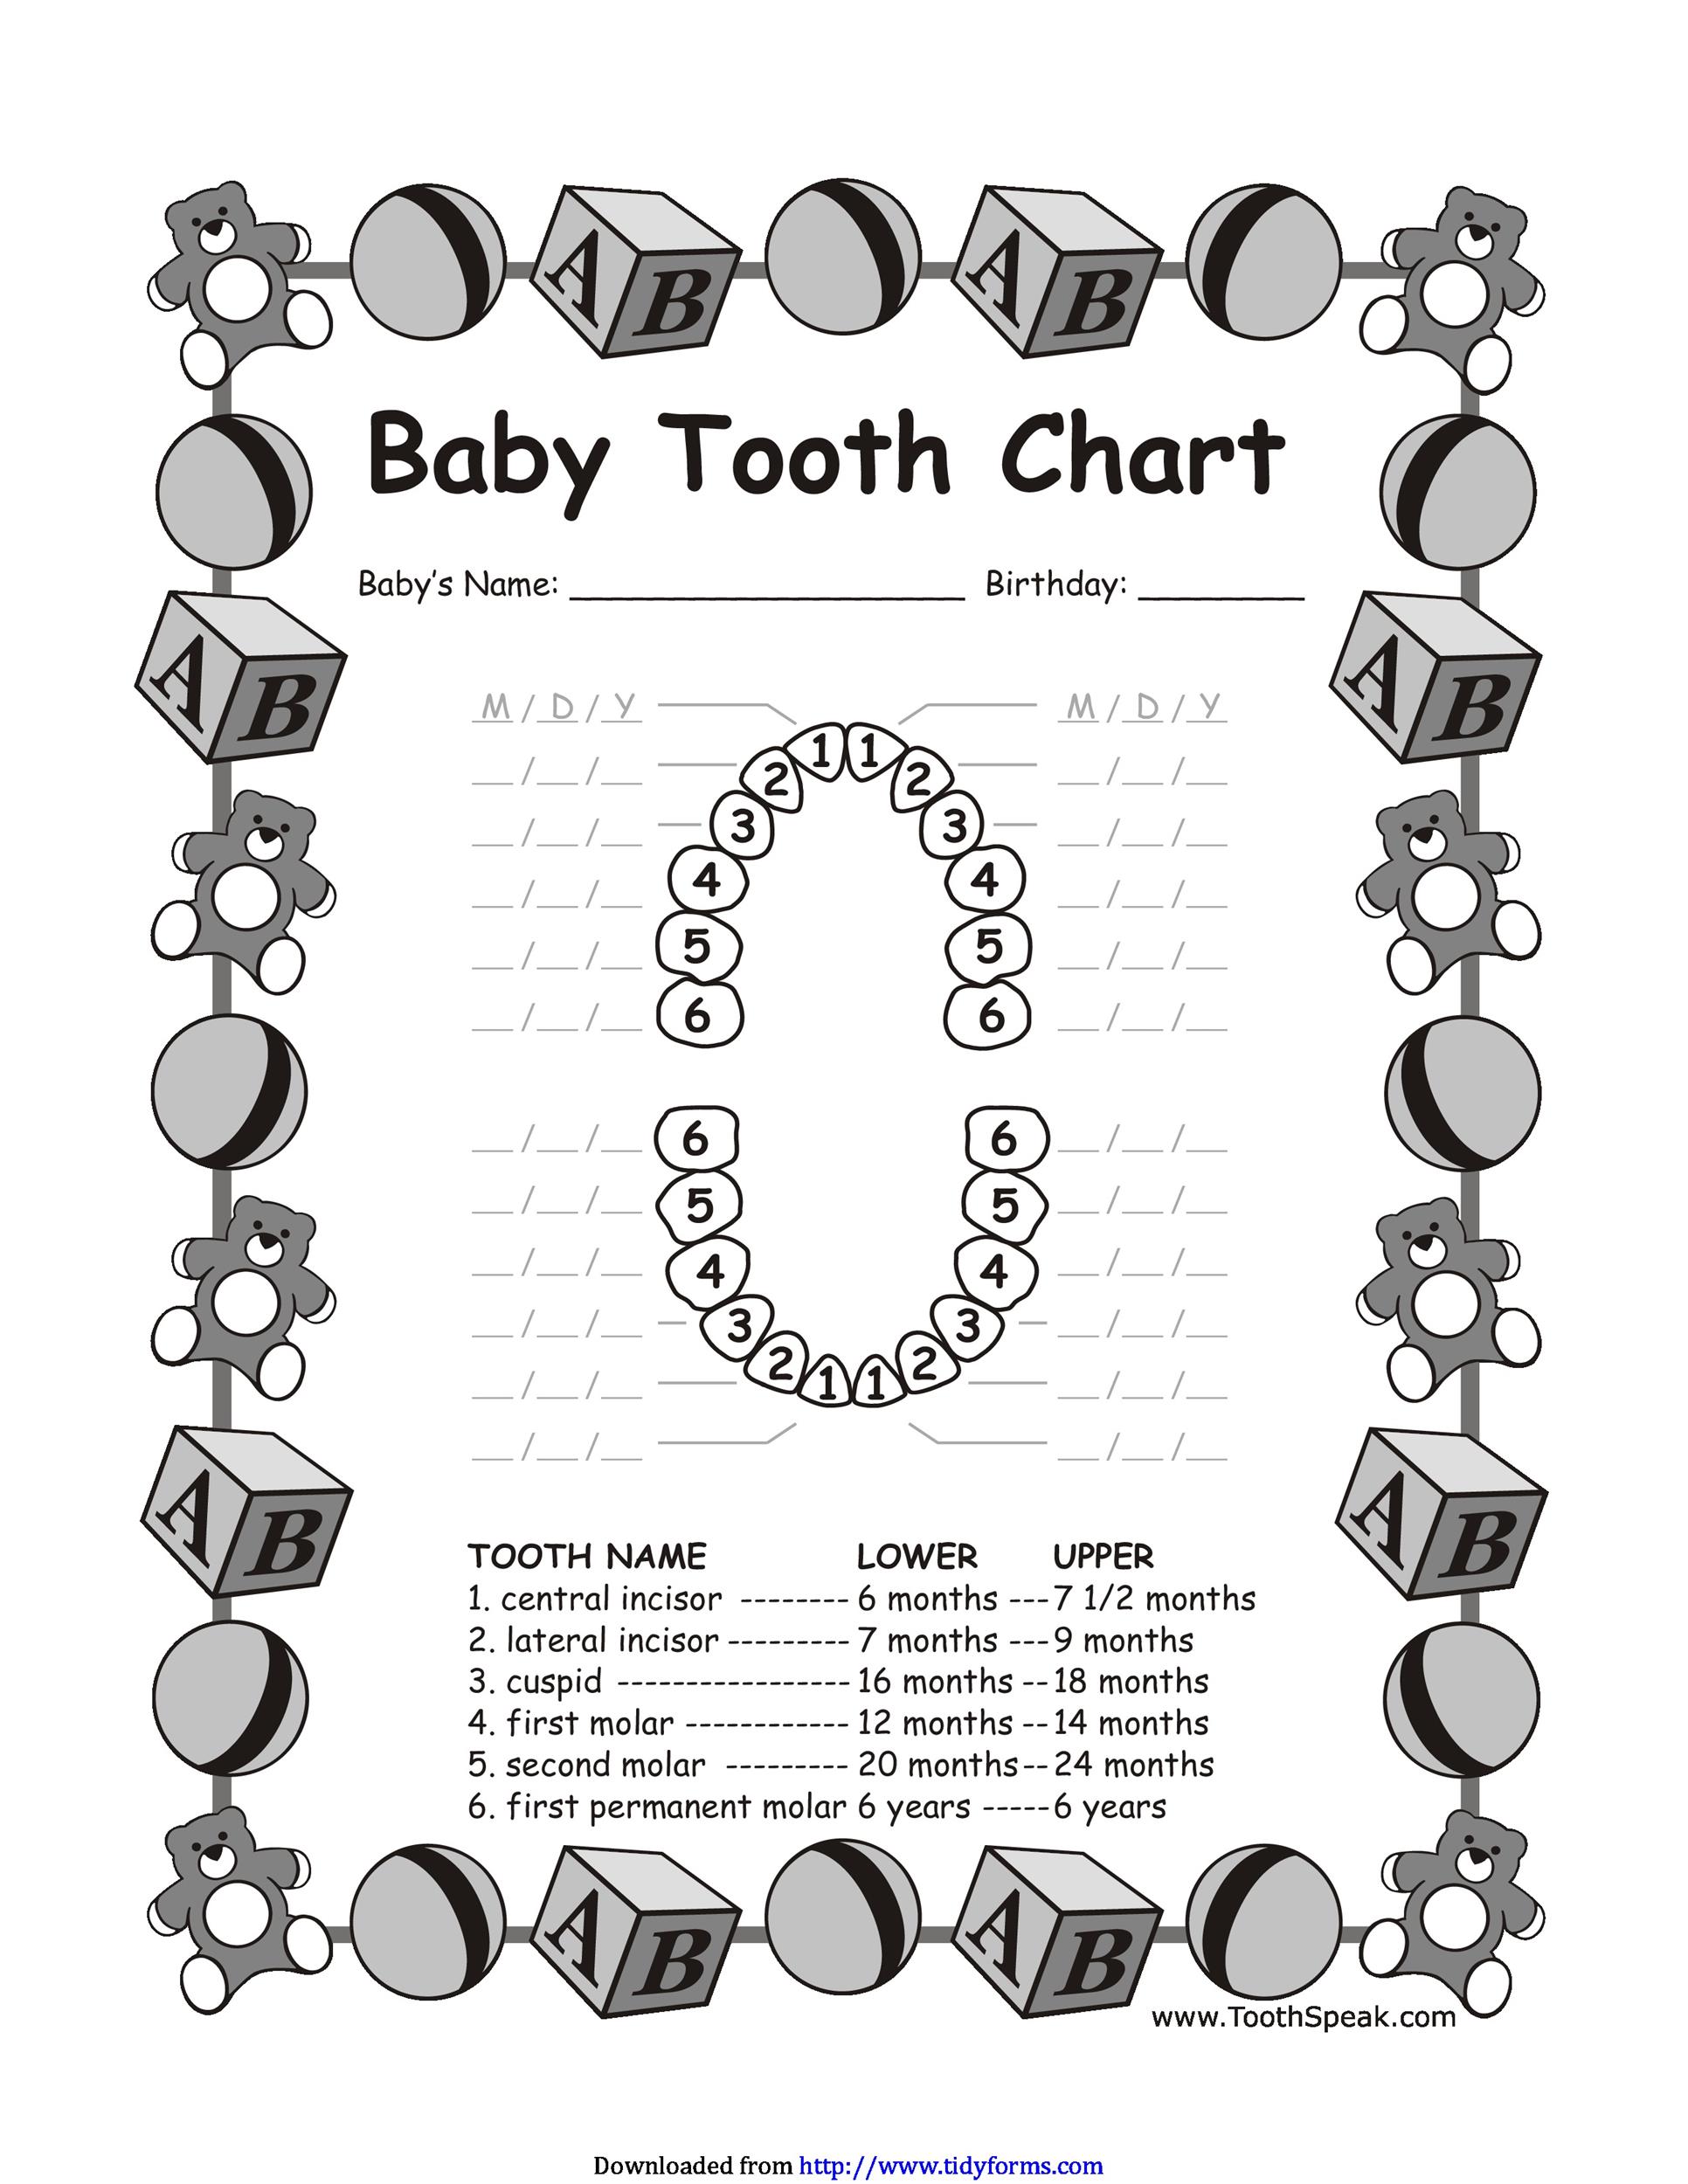 view-baby-teeth-eruption-charts-pictures-teeth-walls-collection-for